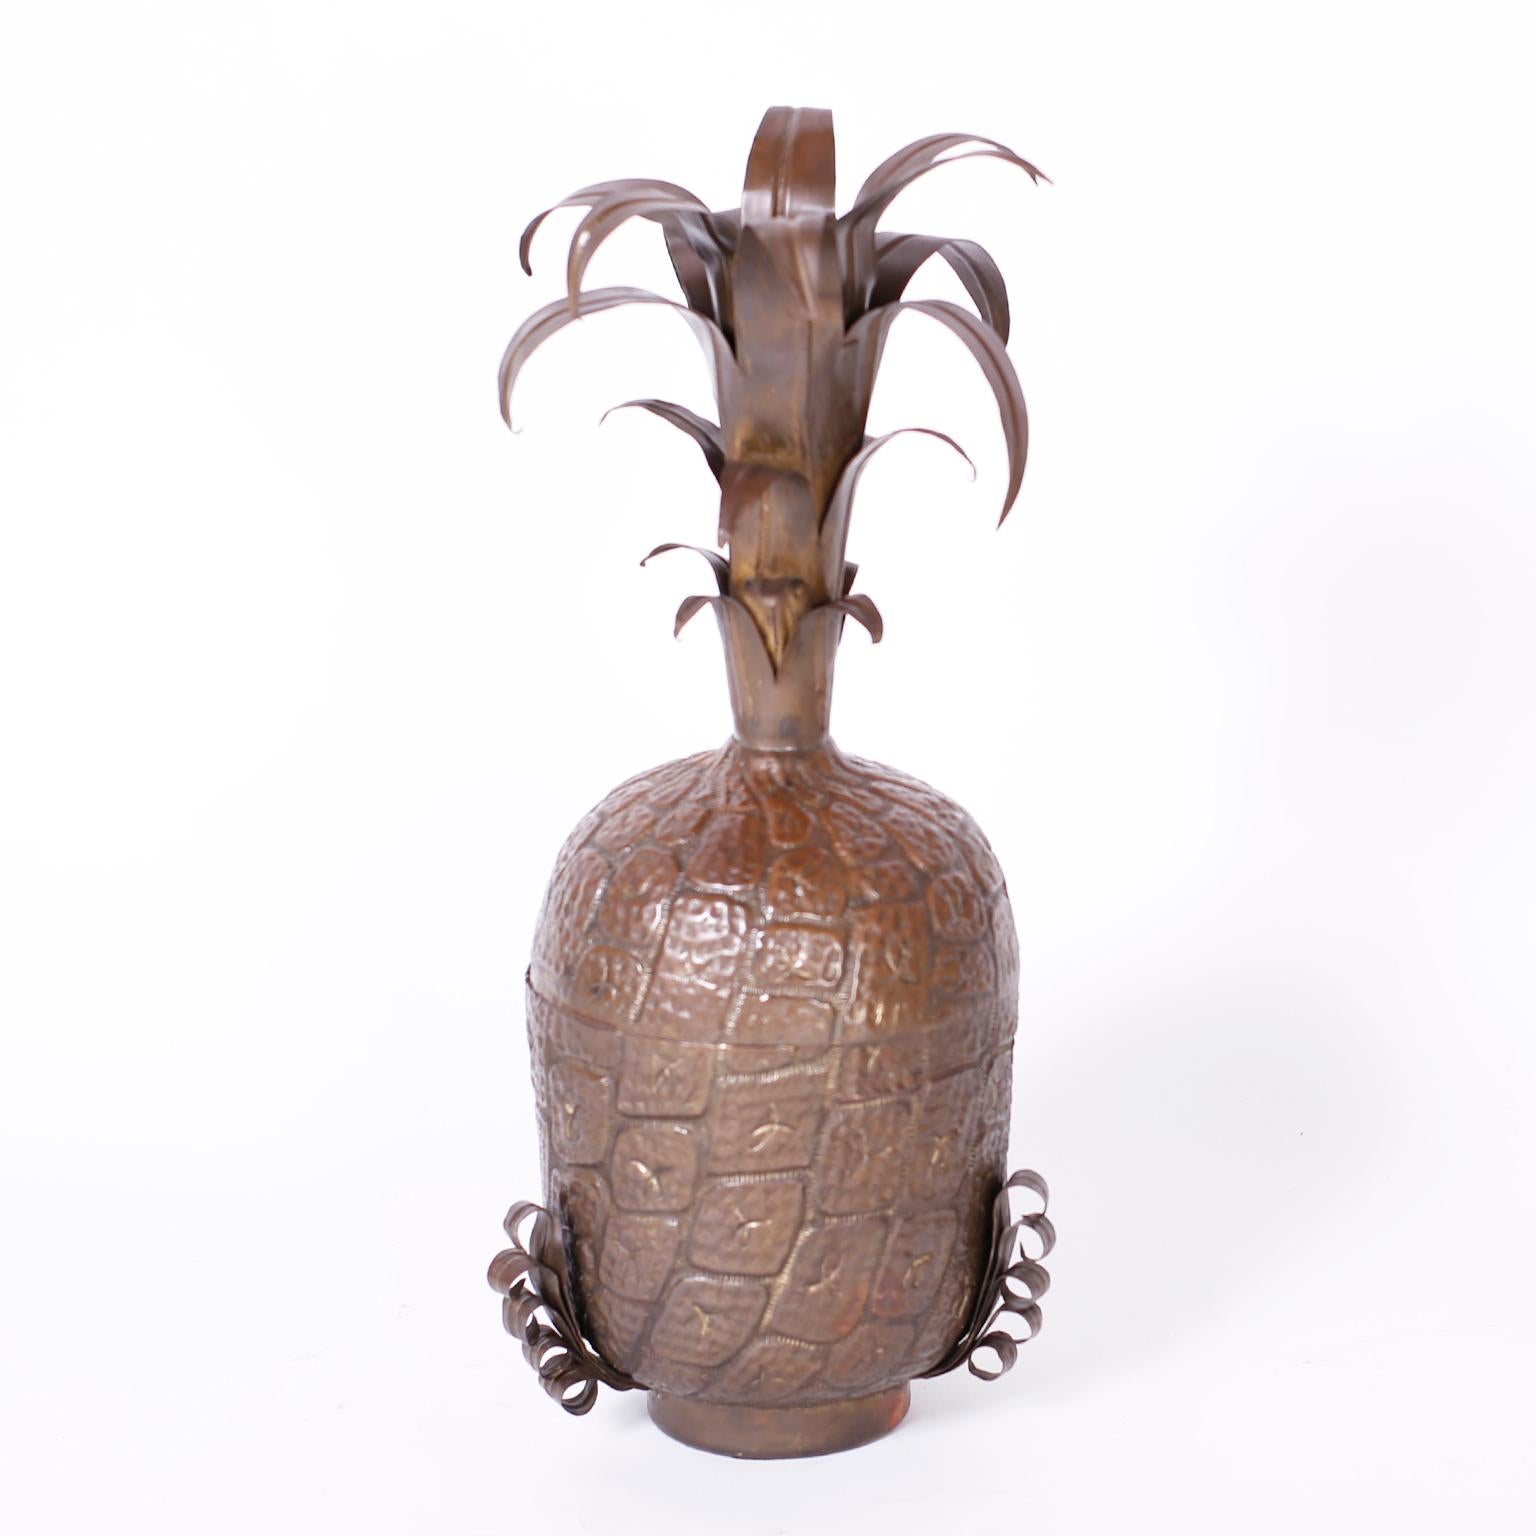 Midcentury lidded pineapple expertly crafted in copper, hand hammered and decorated with stylized leaves and retaining its bronze like patina.